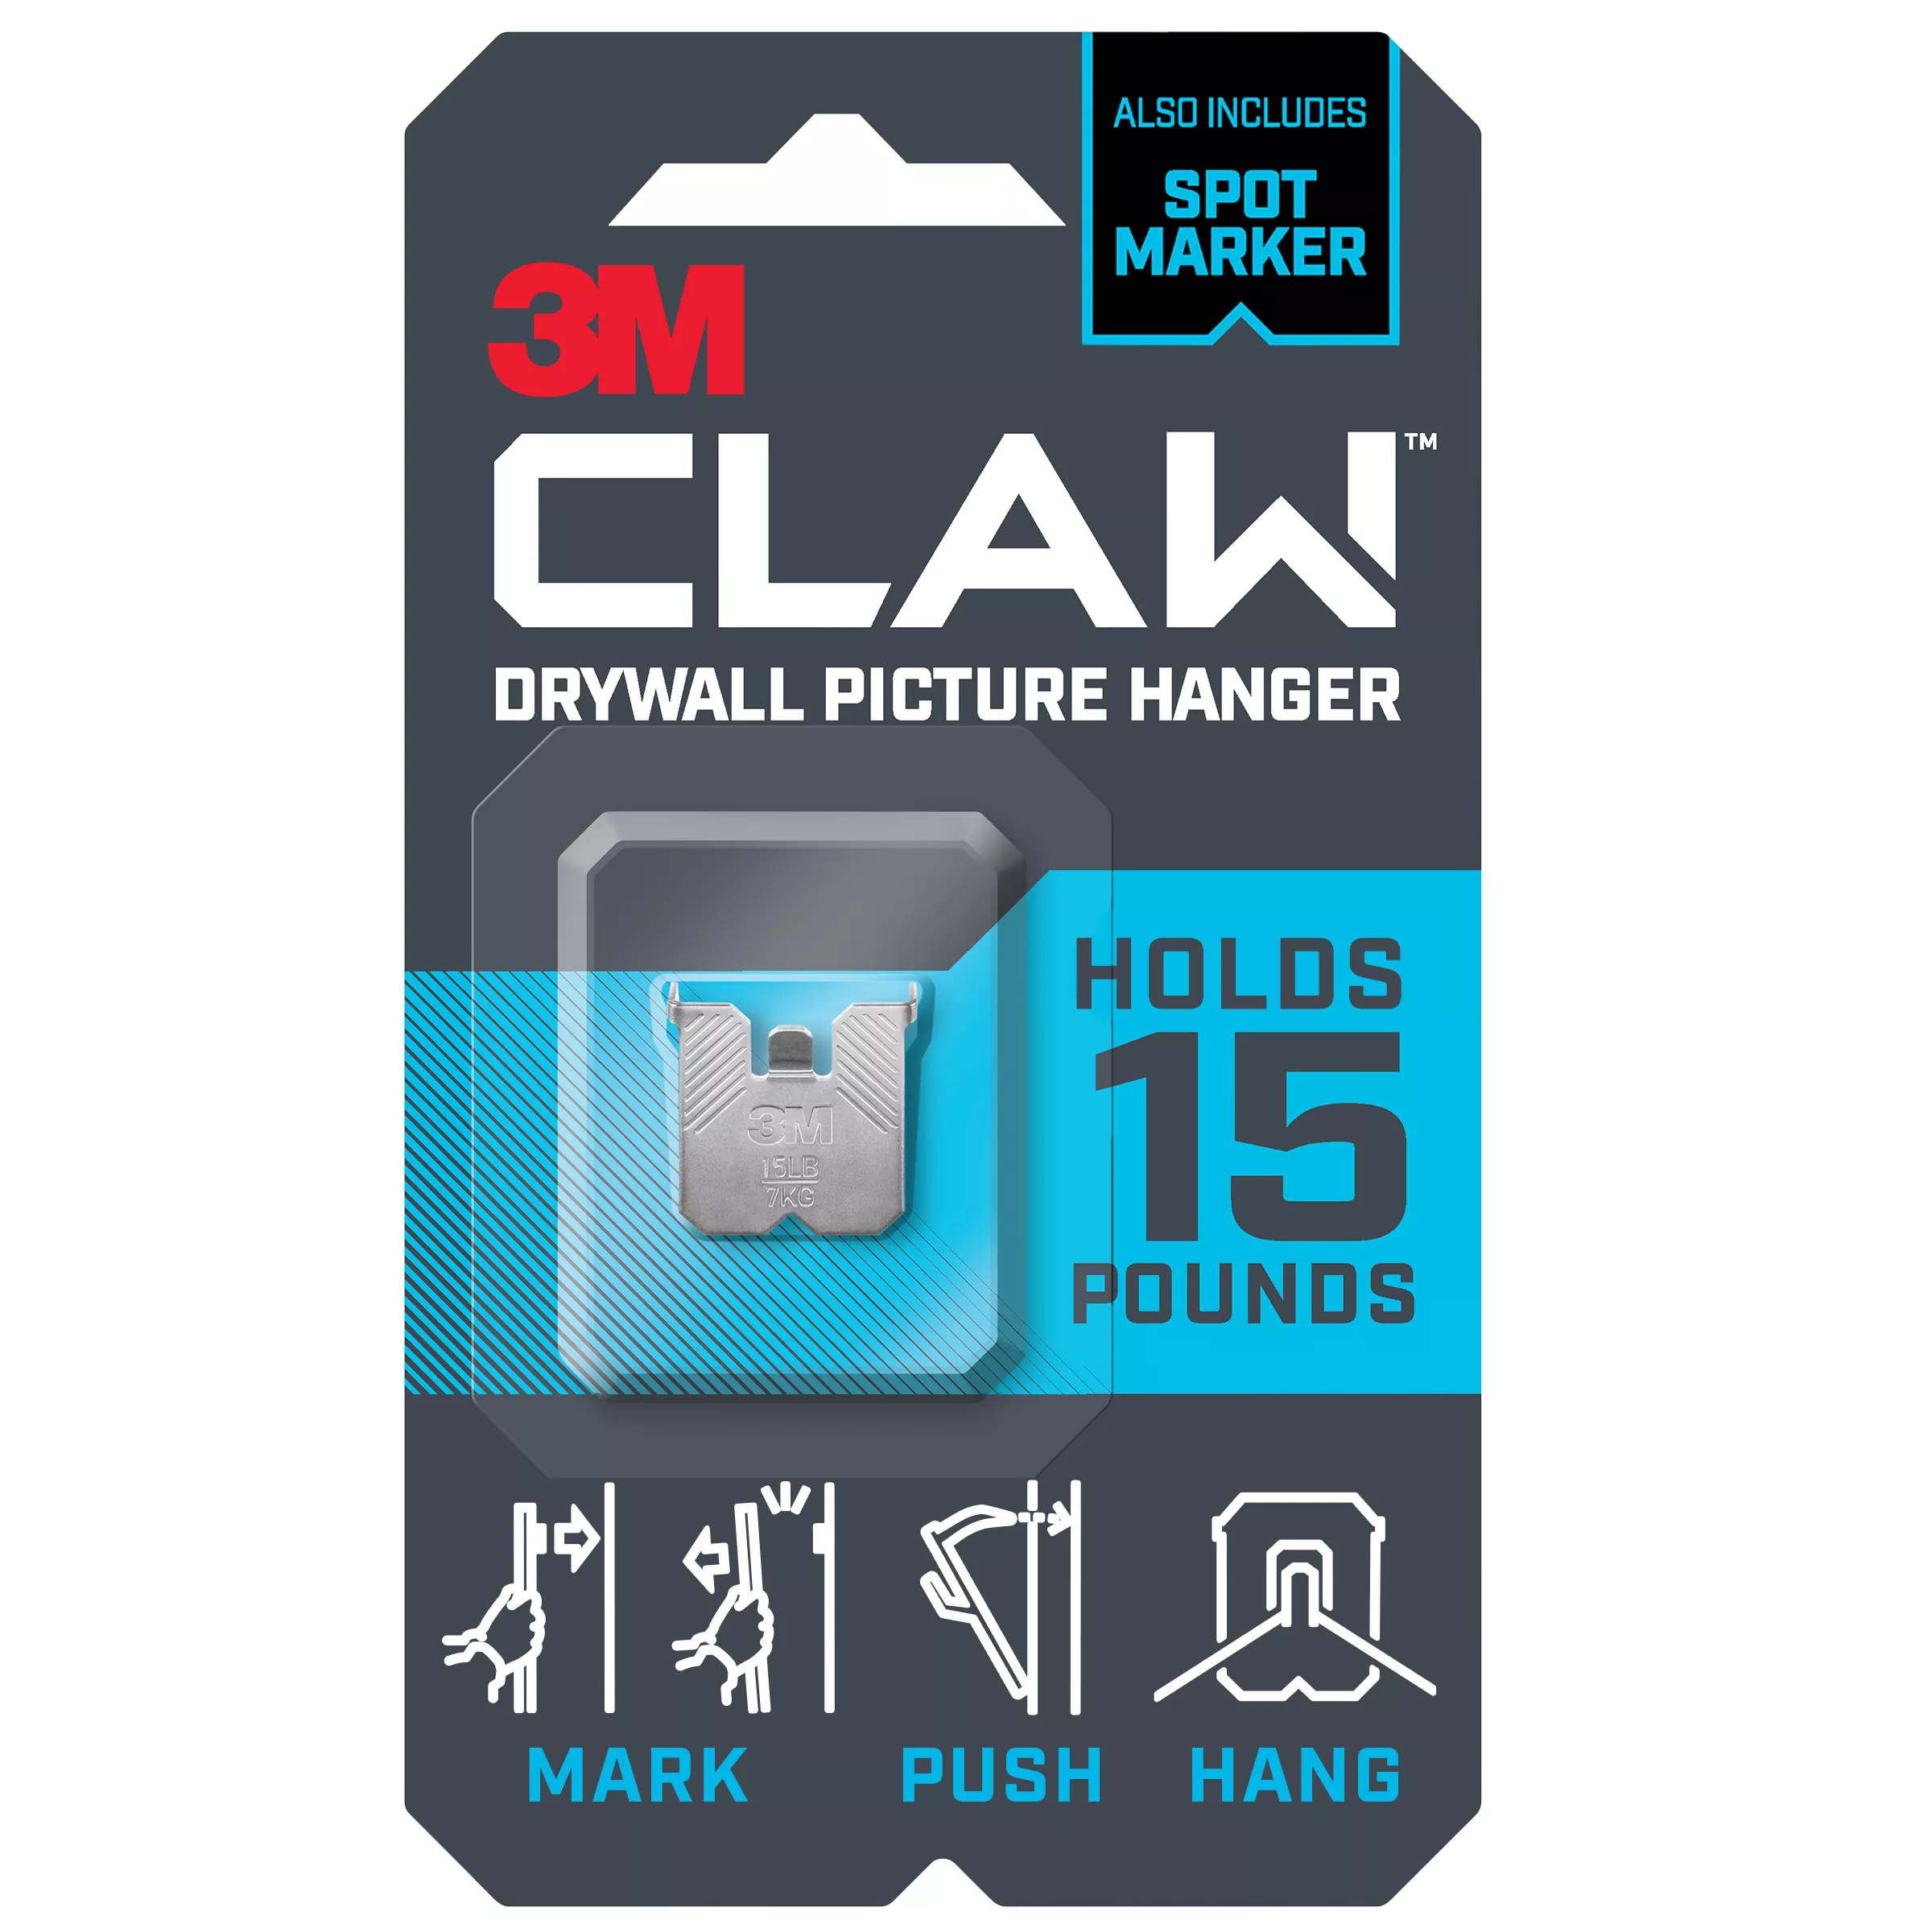 SKU 7100233152 | 3M CLAW™ Drywall Picture Hanger 15 lb with Temporary Spot Marker 3PH15M-1ES